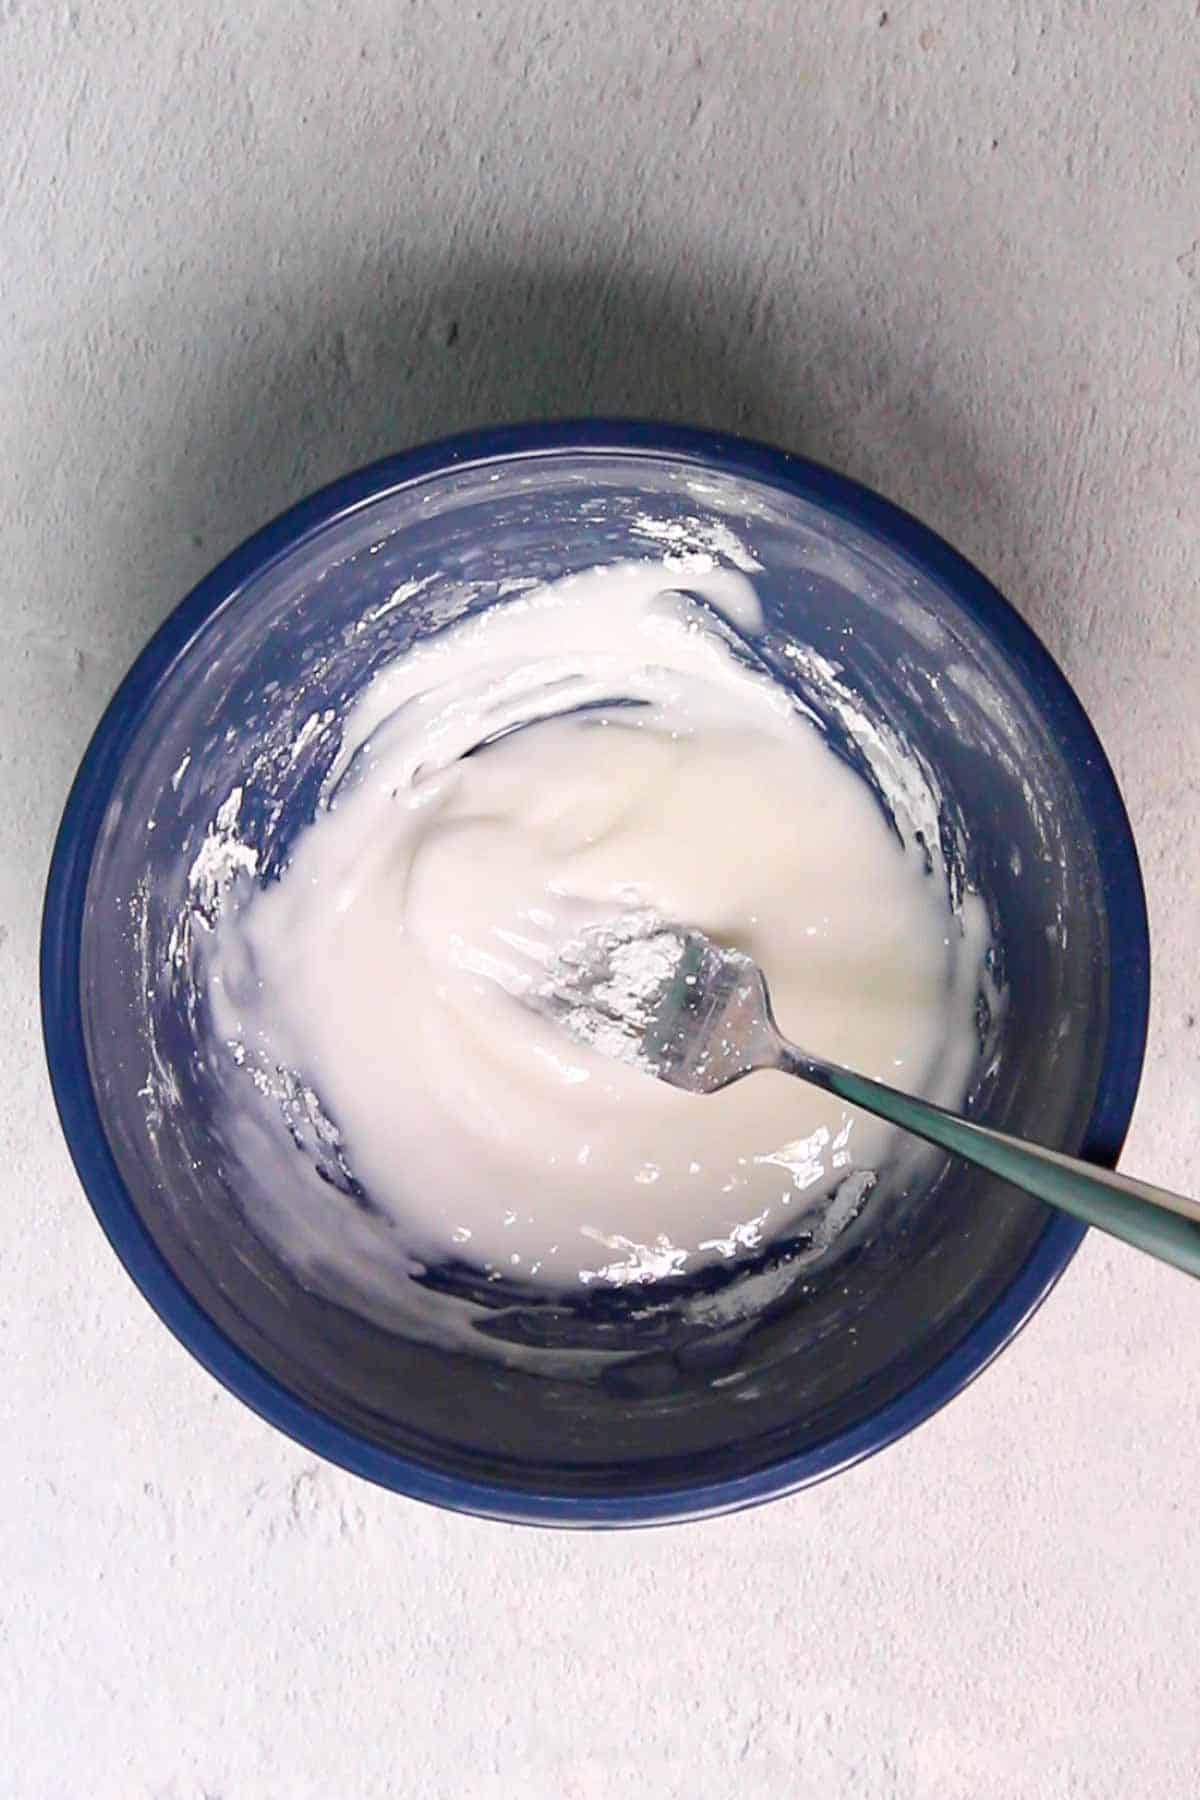 Powdered sugar and lemon juice stirred until combined in a small mixing bowl